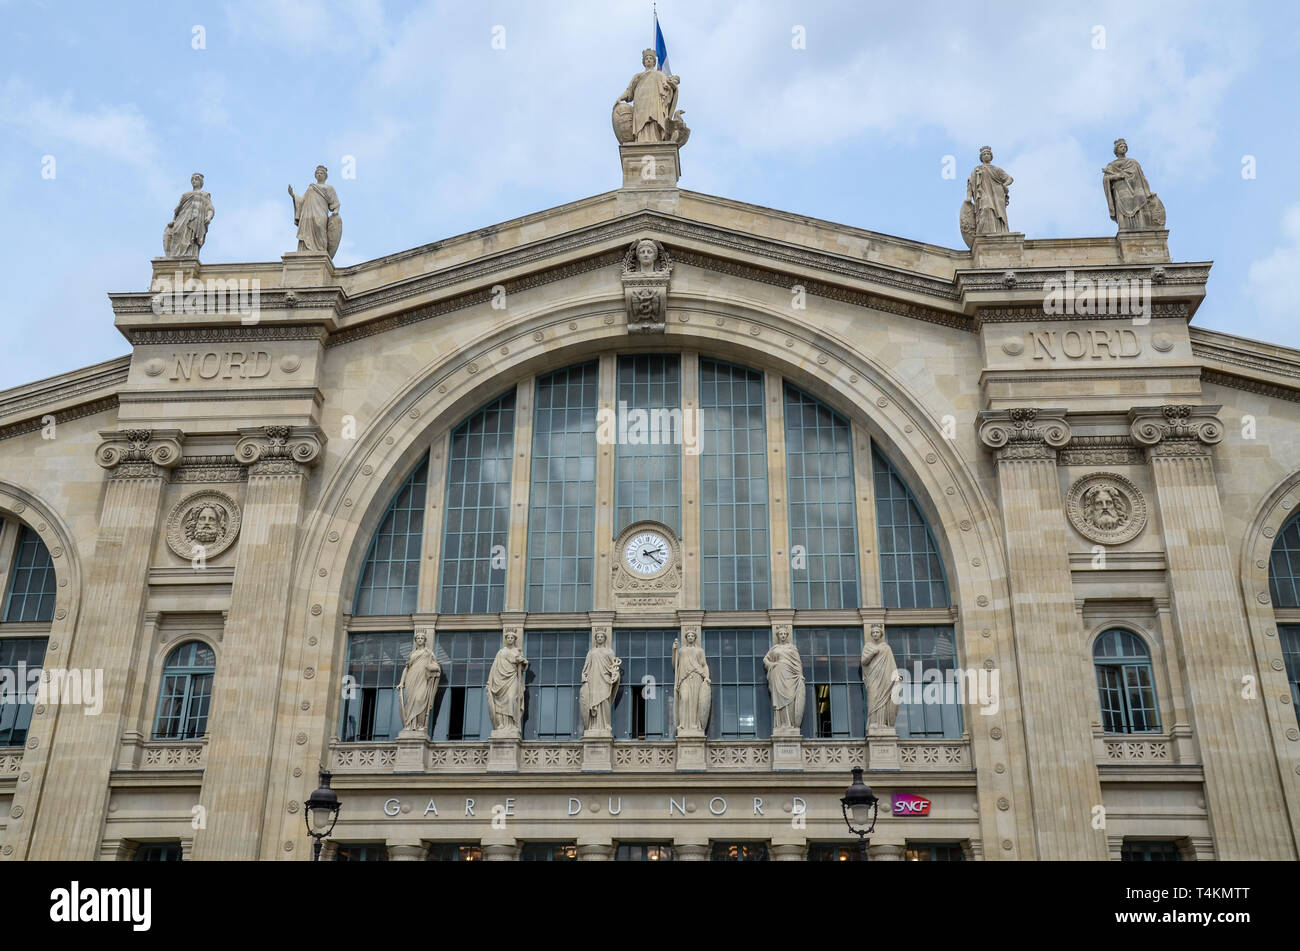 Paris Gare du Nord railway station, Paris, France. Facade with clock and  stonework lettering. Statues. SNCF brand logo. Carvings. Space for copy  Stock Photo - Alamy